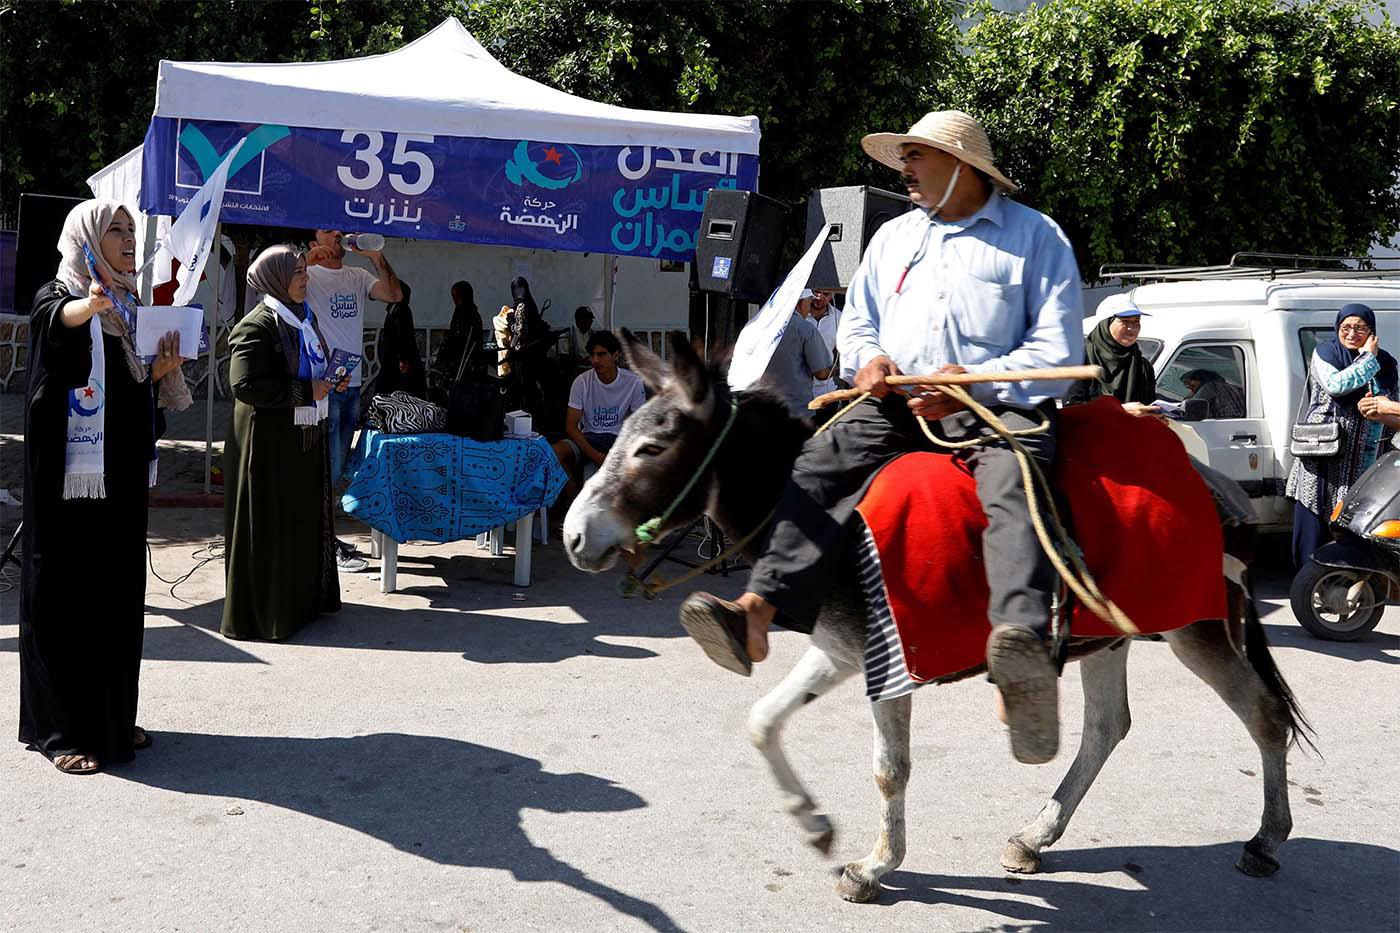 A man rides a donkey past a campaign stall of Tunisia's moderate Islamist Ennahda party in al-Alia